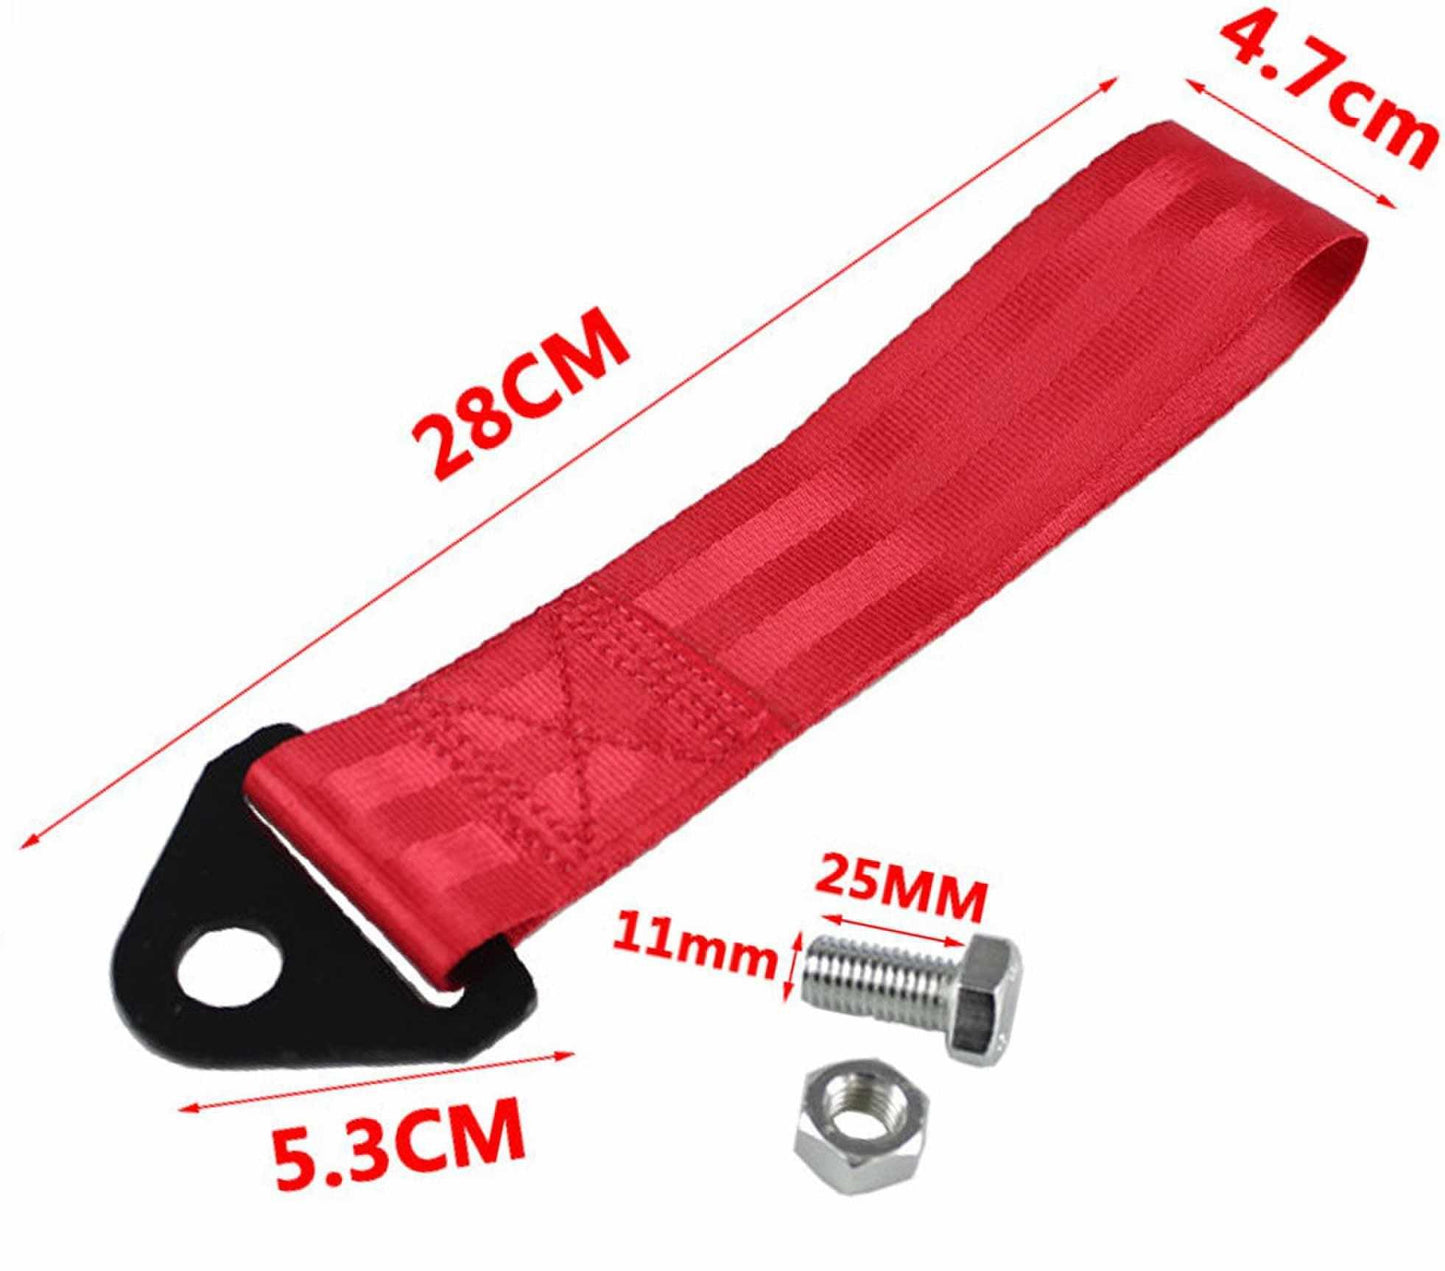 RASTP Universal 28cm High Strength Nylon Tow Strap 2T Towing Strap With Nut - RASTP